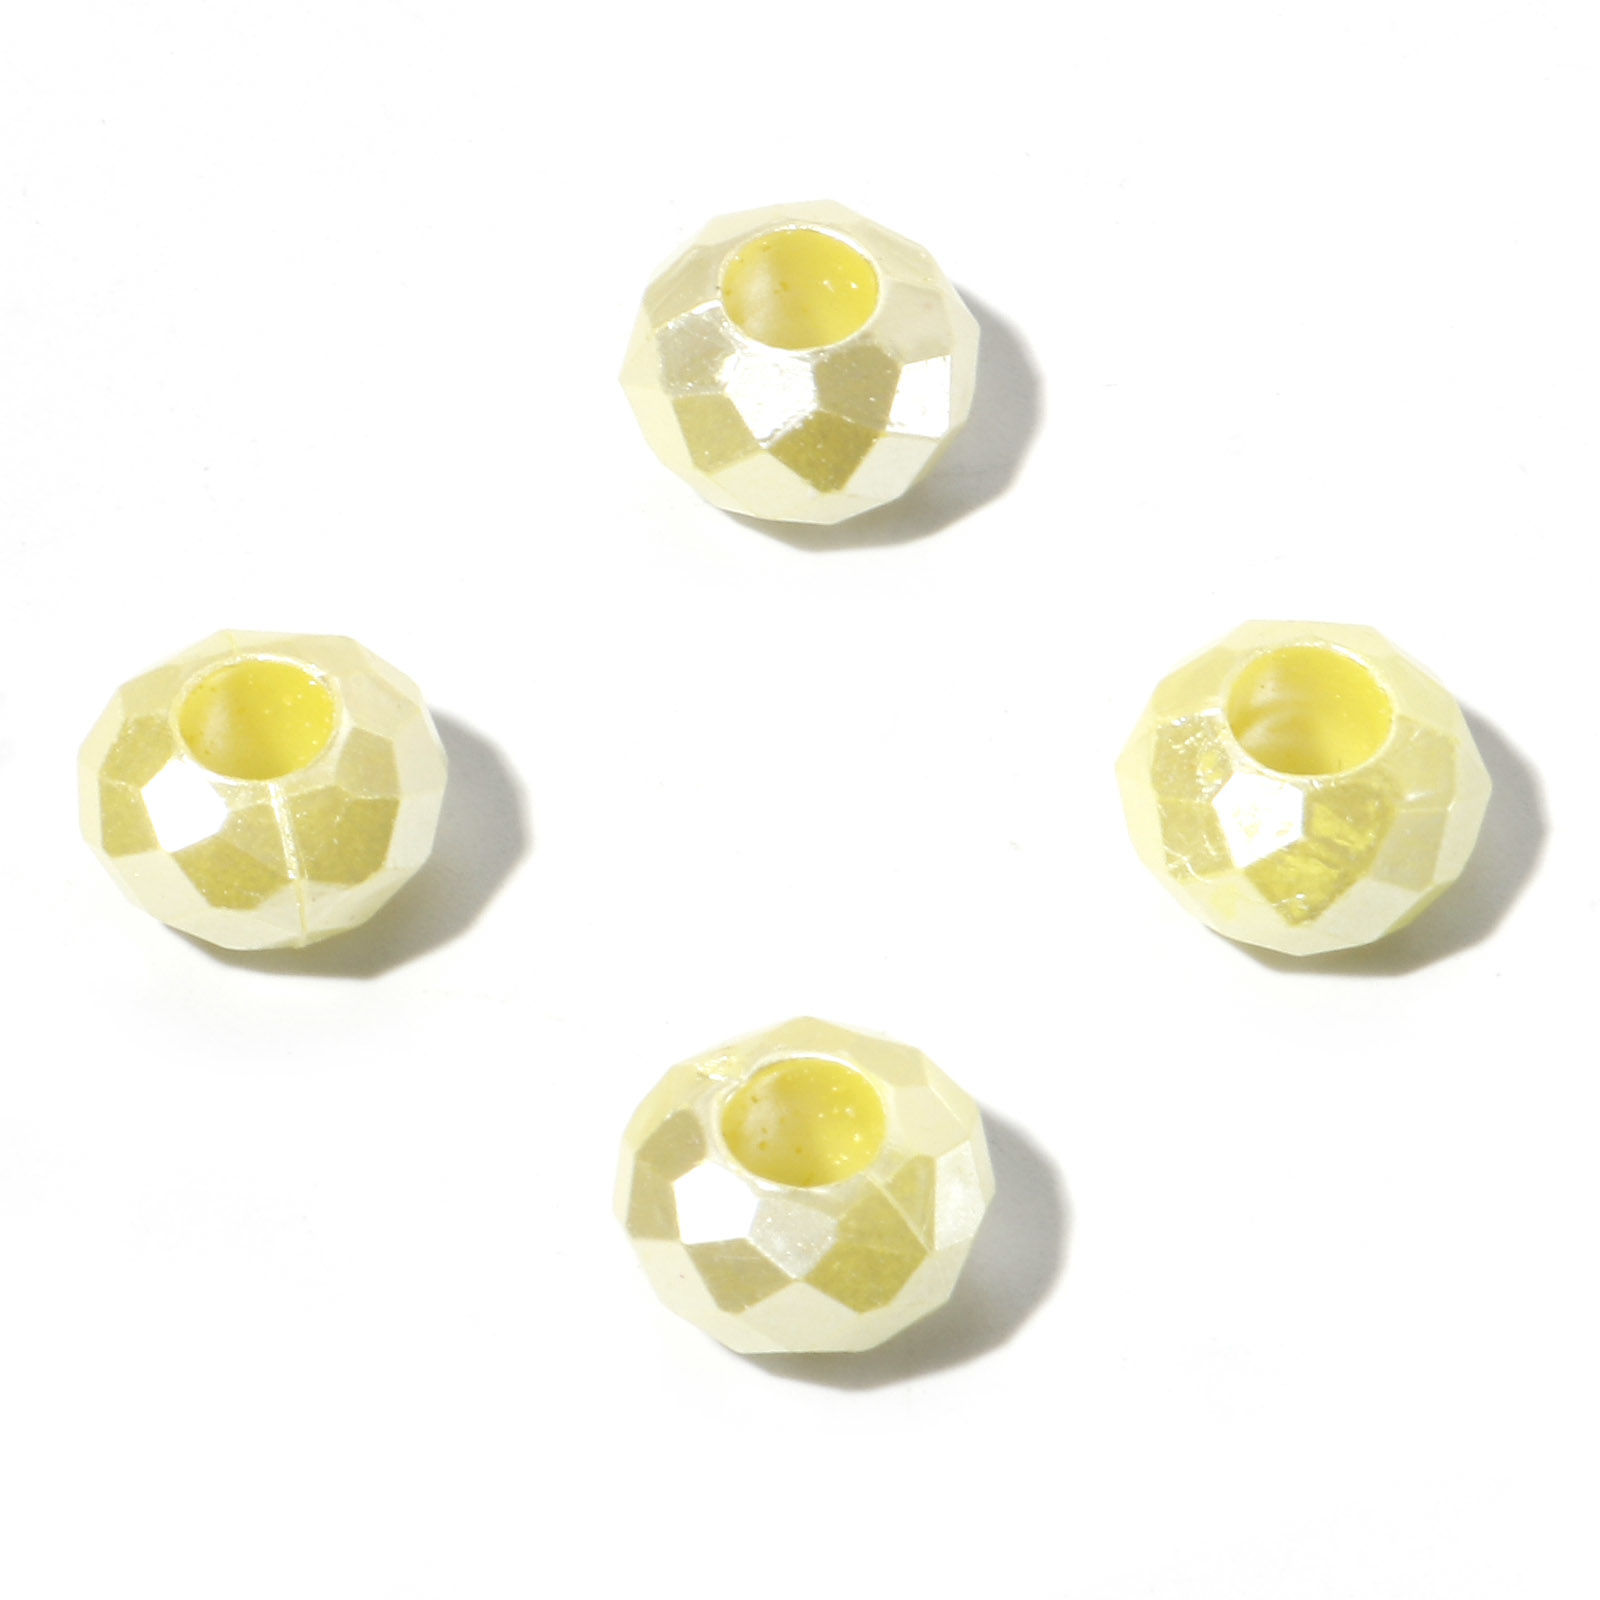 Picture of Acrylic European Style Large Hole Charm Beads Yellow Round Faceted 12mm Dia., Hole: Approx 4.6mm, 100 PCs